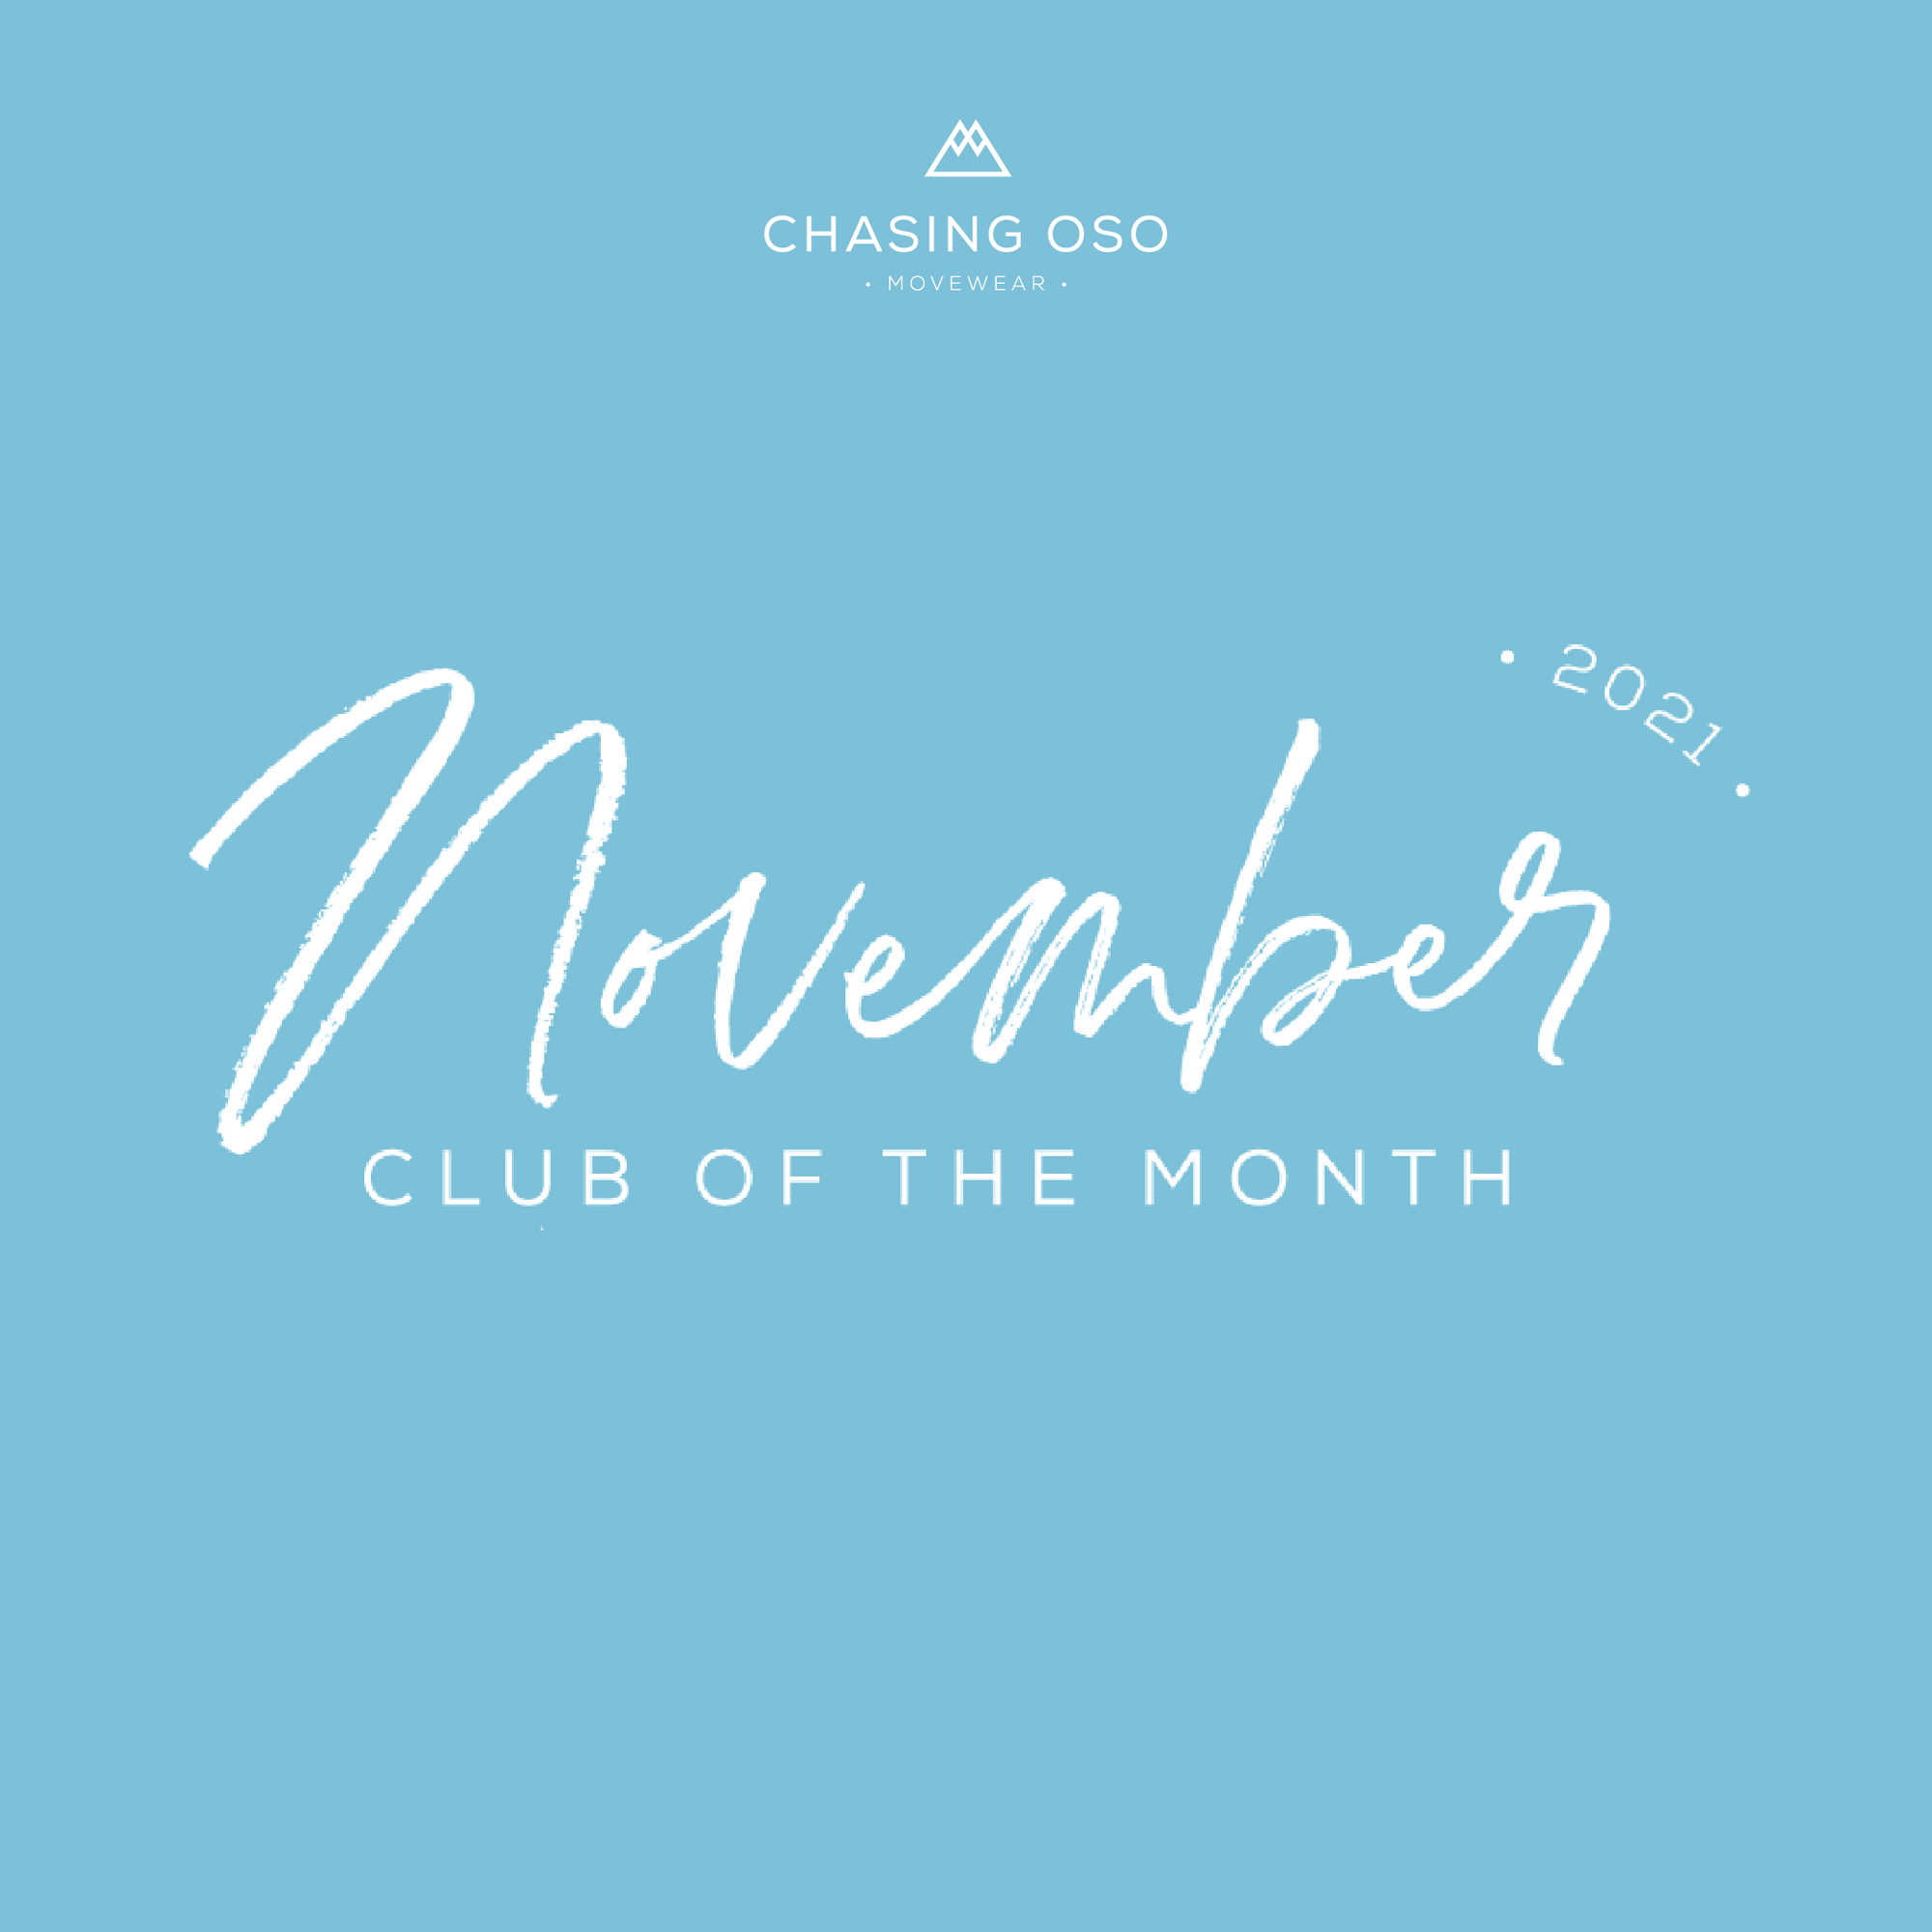 OSO'S CLUB OF THE MONTH